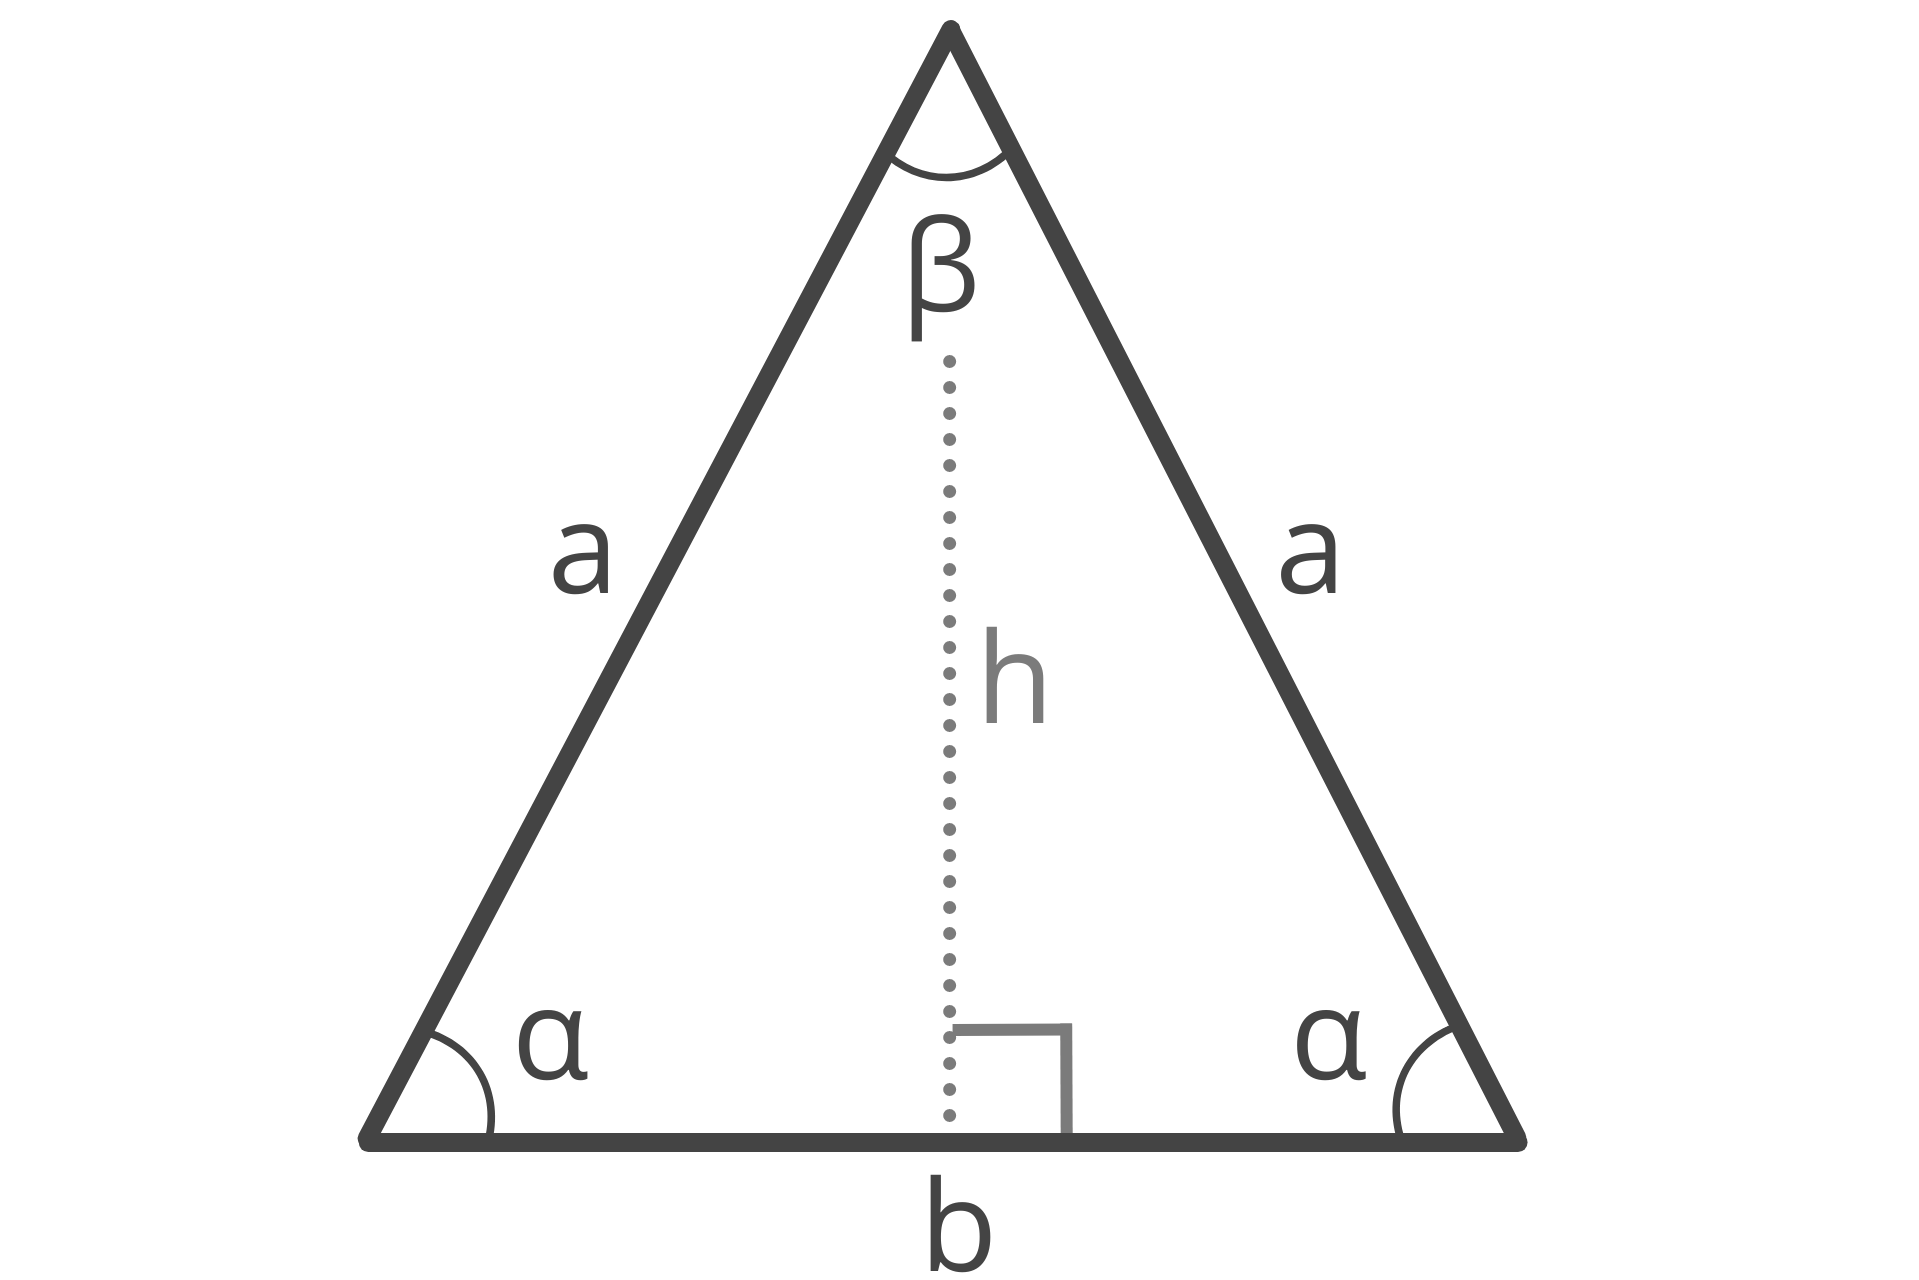 diagram of a isosceles triangle showing leg a, base c, angles alpha and beta, and height h